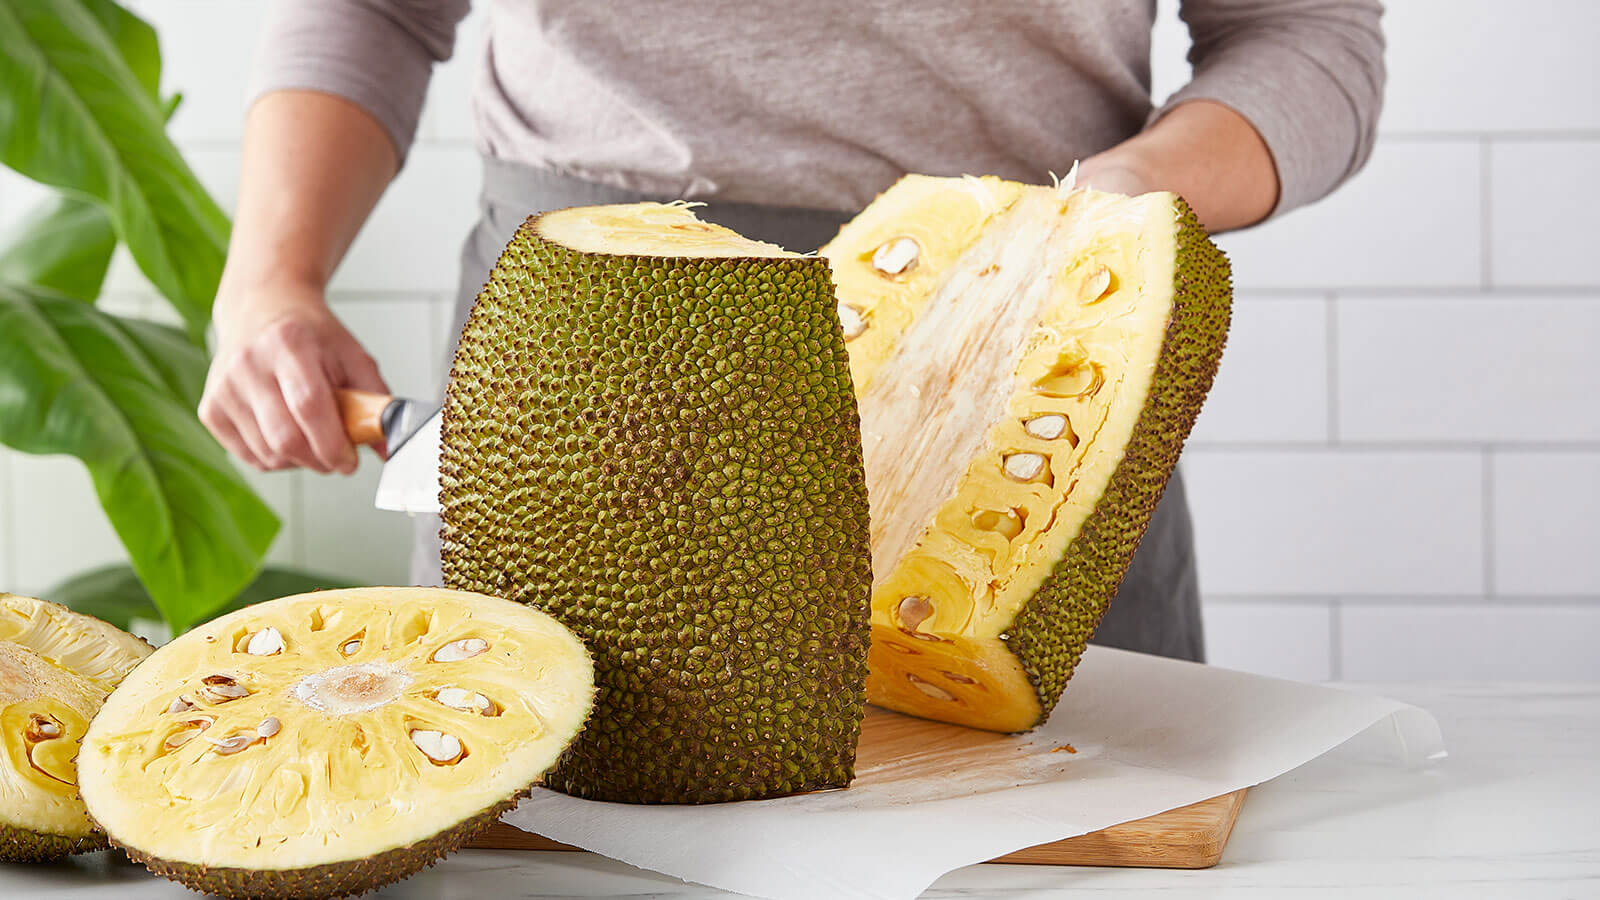 🍍 You Haven’t Really Lived Unless You’ve Tried at Least 12 of These Tropical Fruits Jackfruit